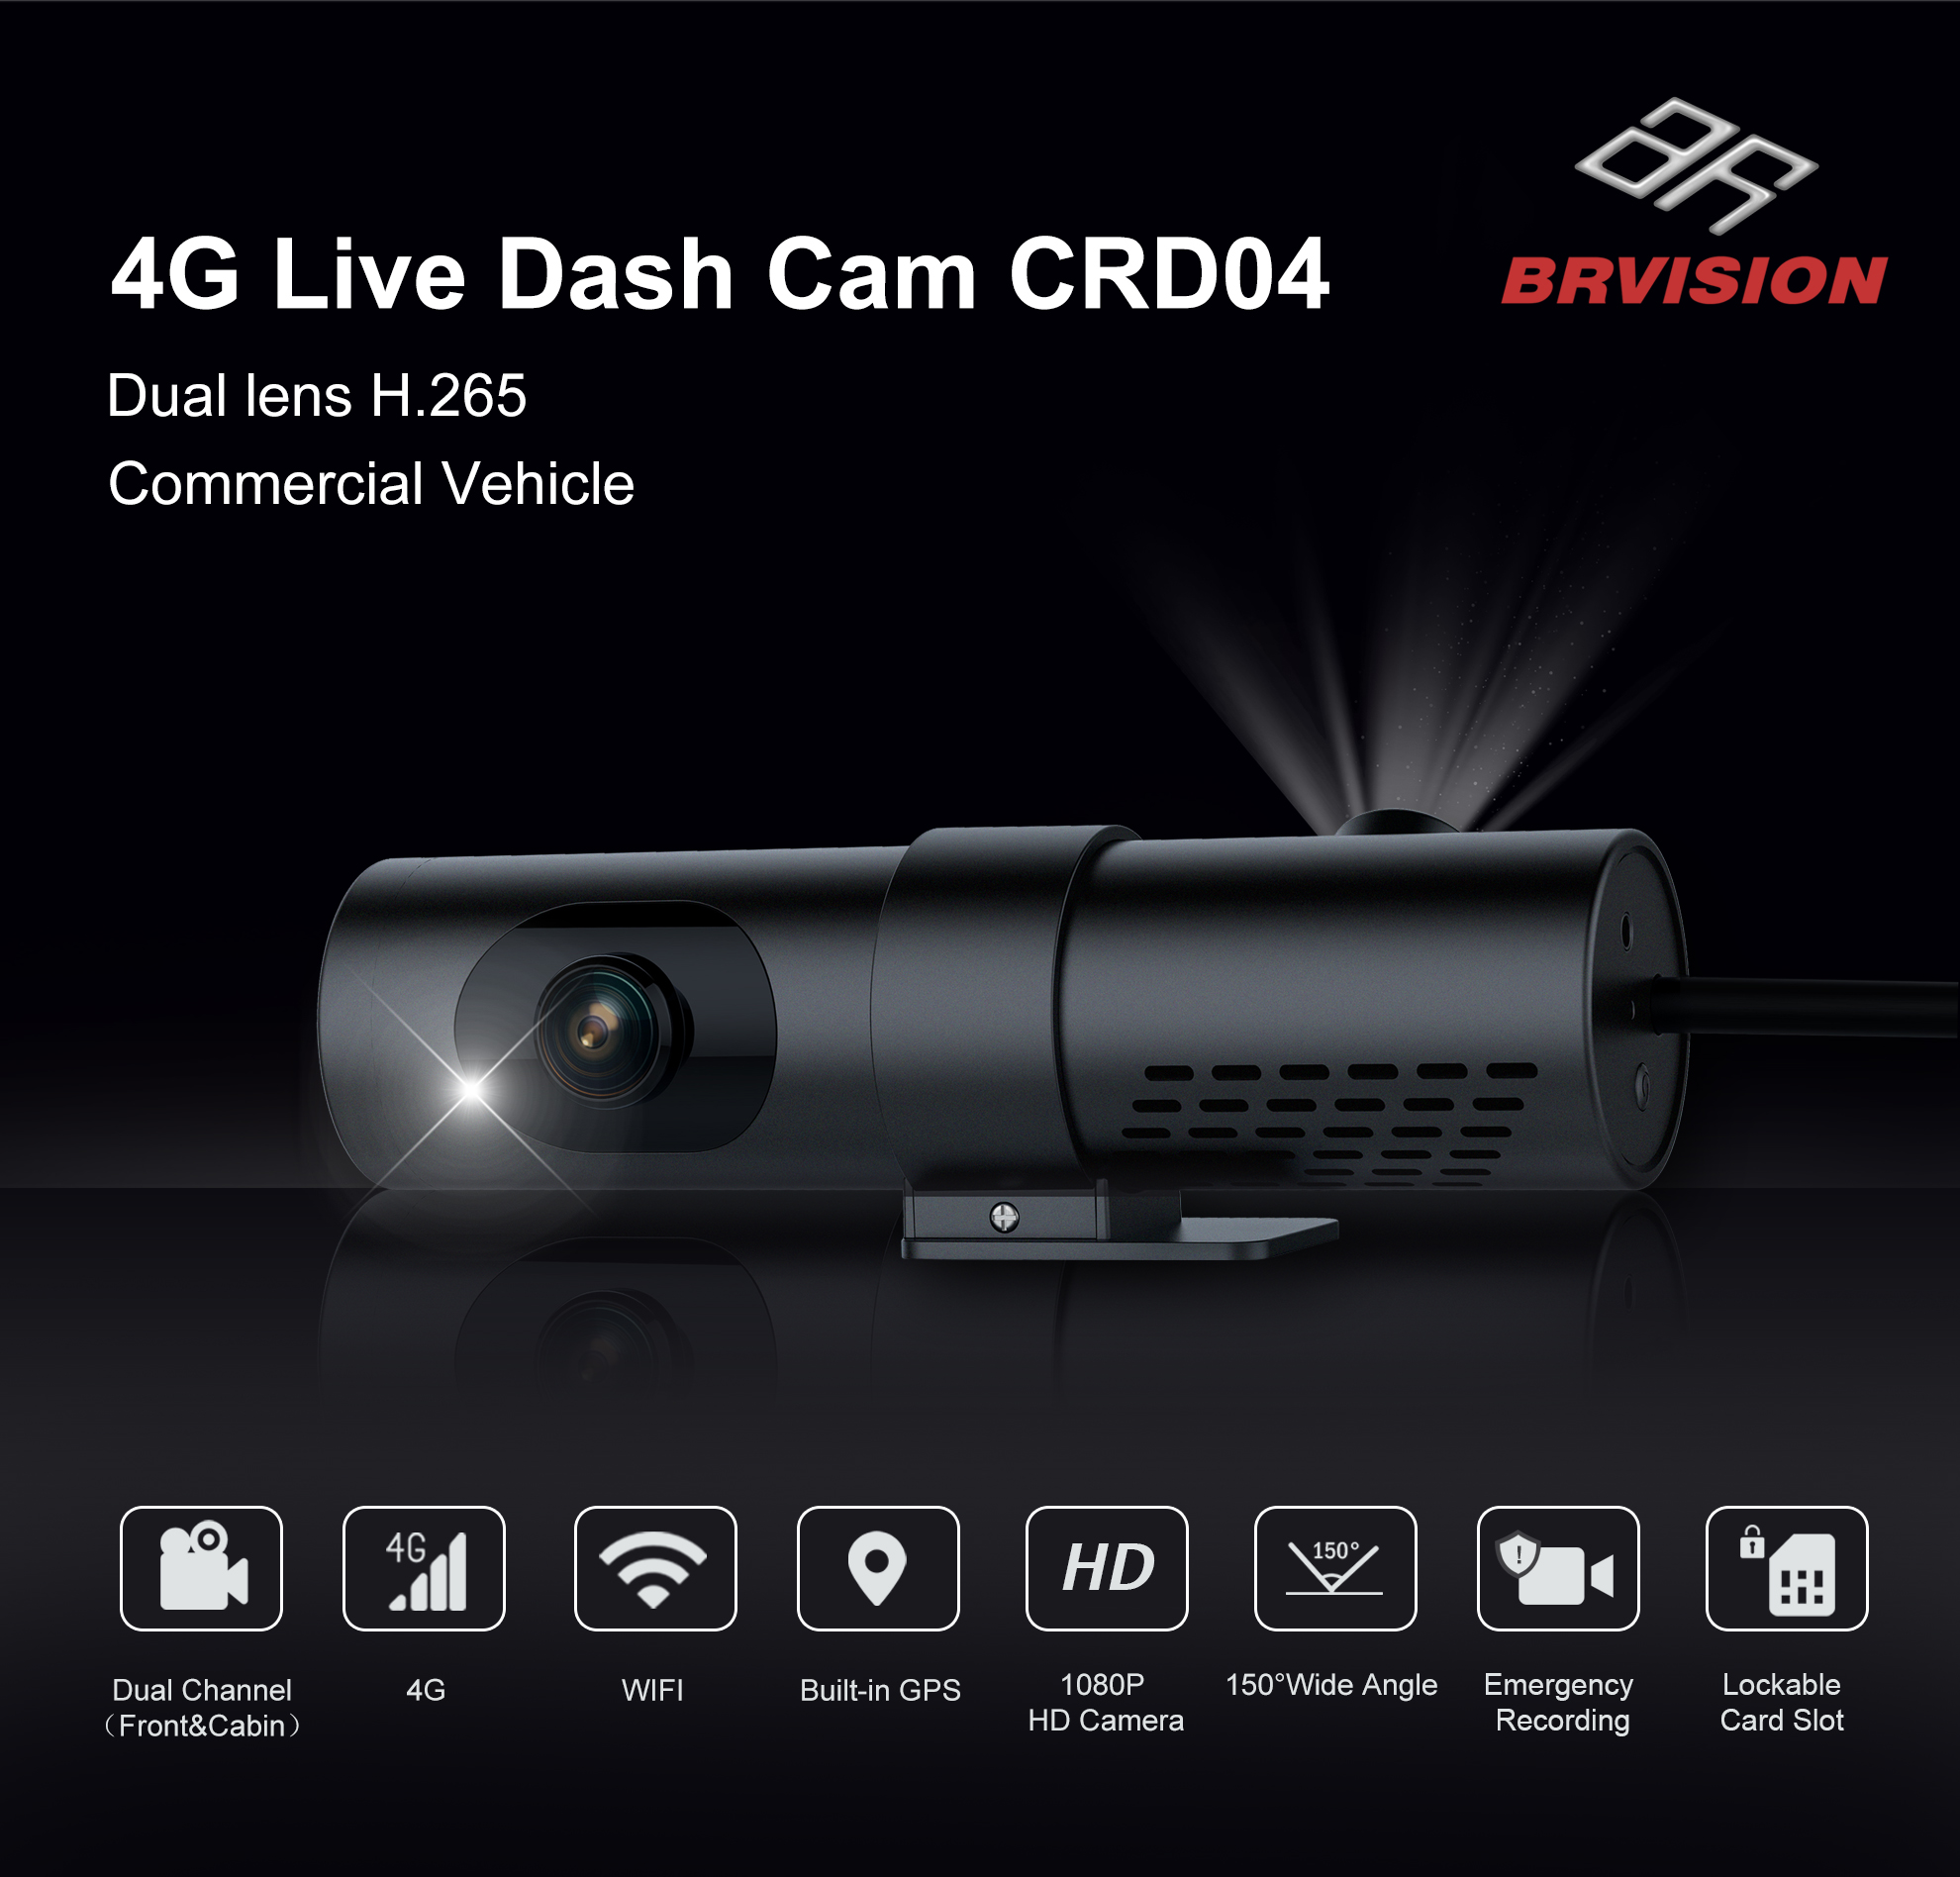 BRvision CDR04